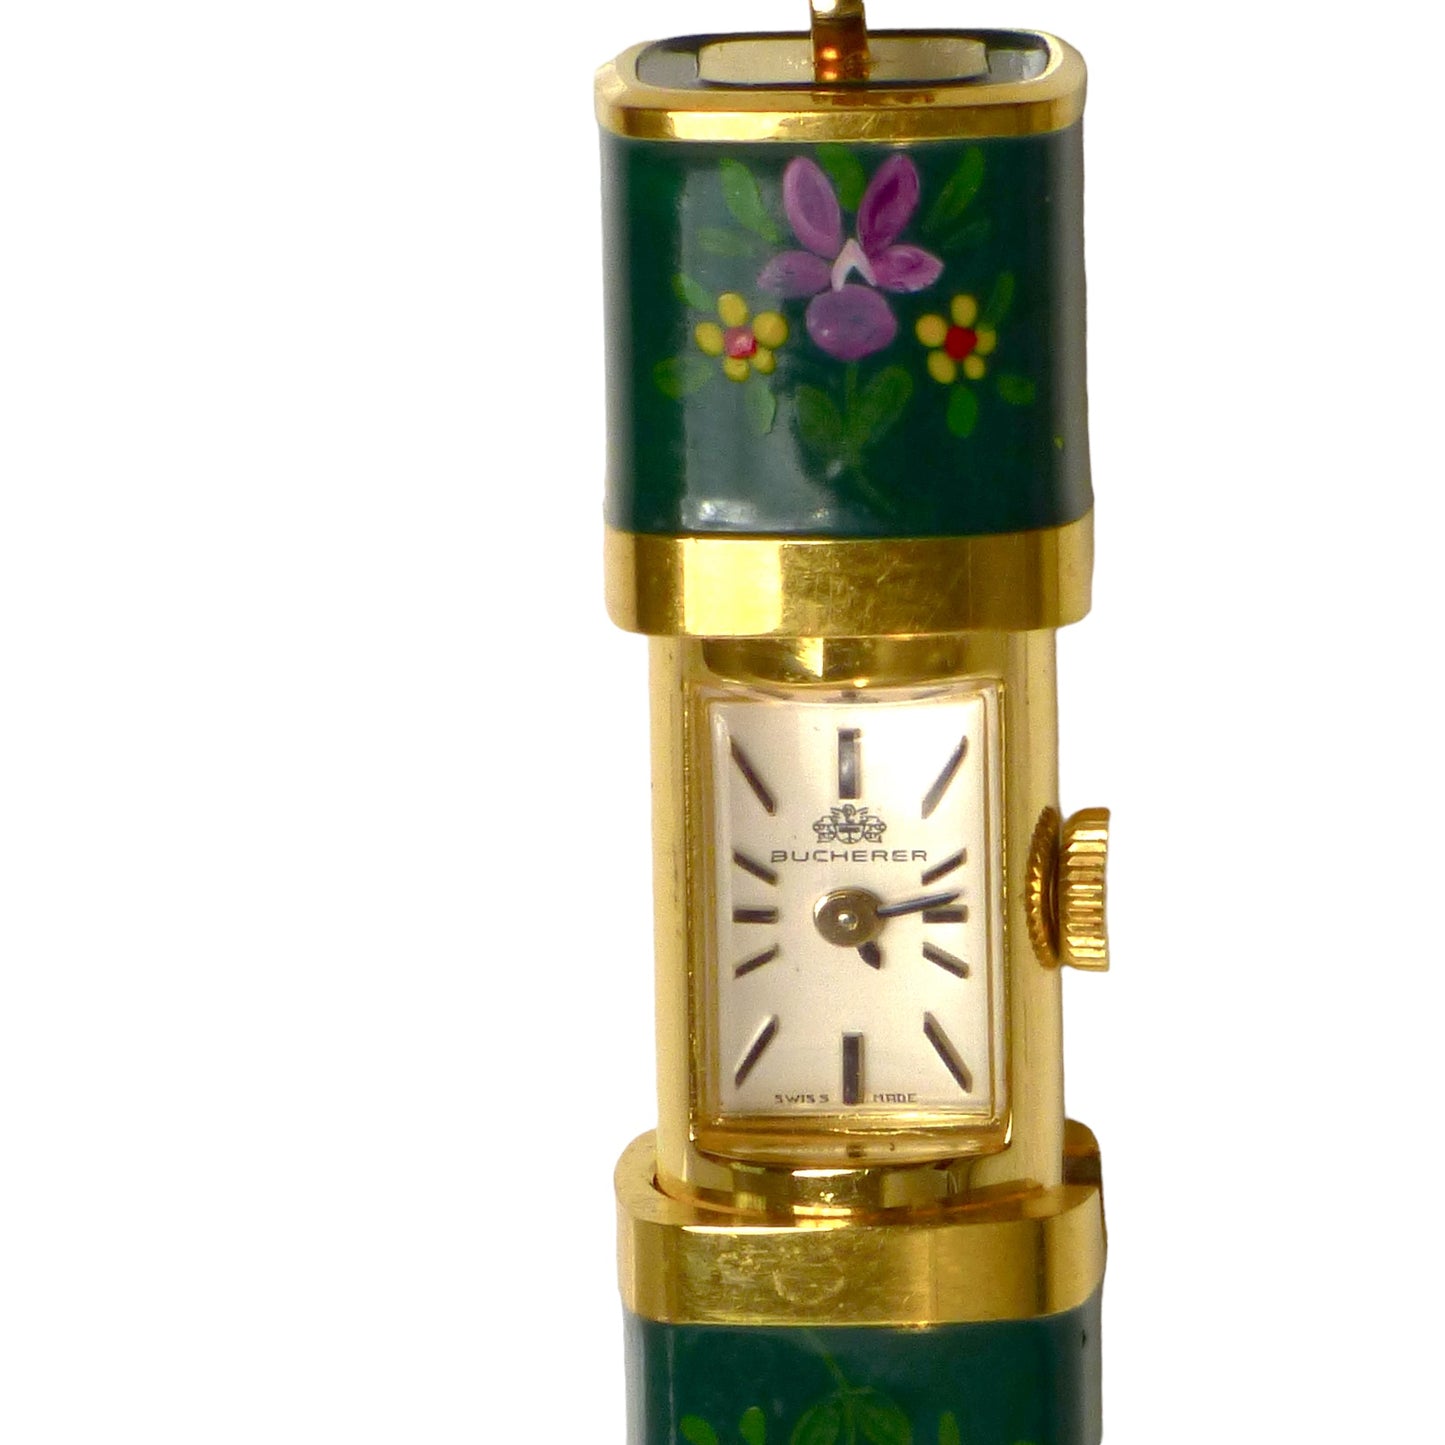 BUCHERER- 1960s Floral Enamel Compact Analog Watch Necklace